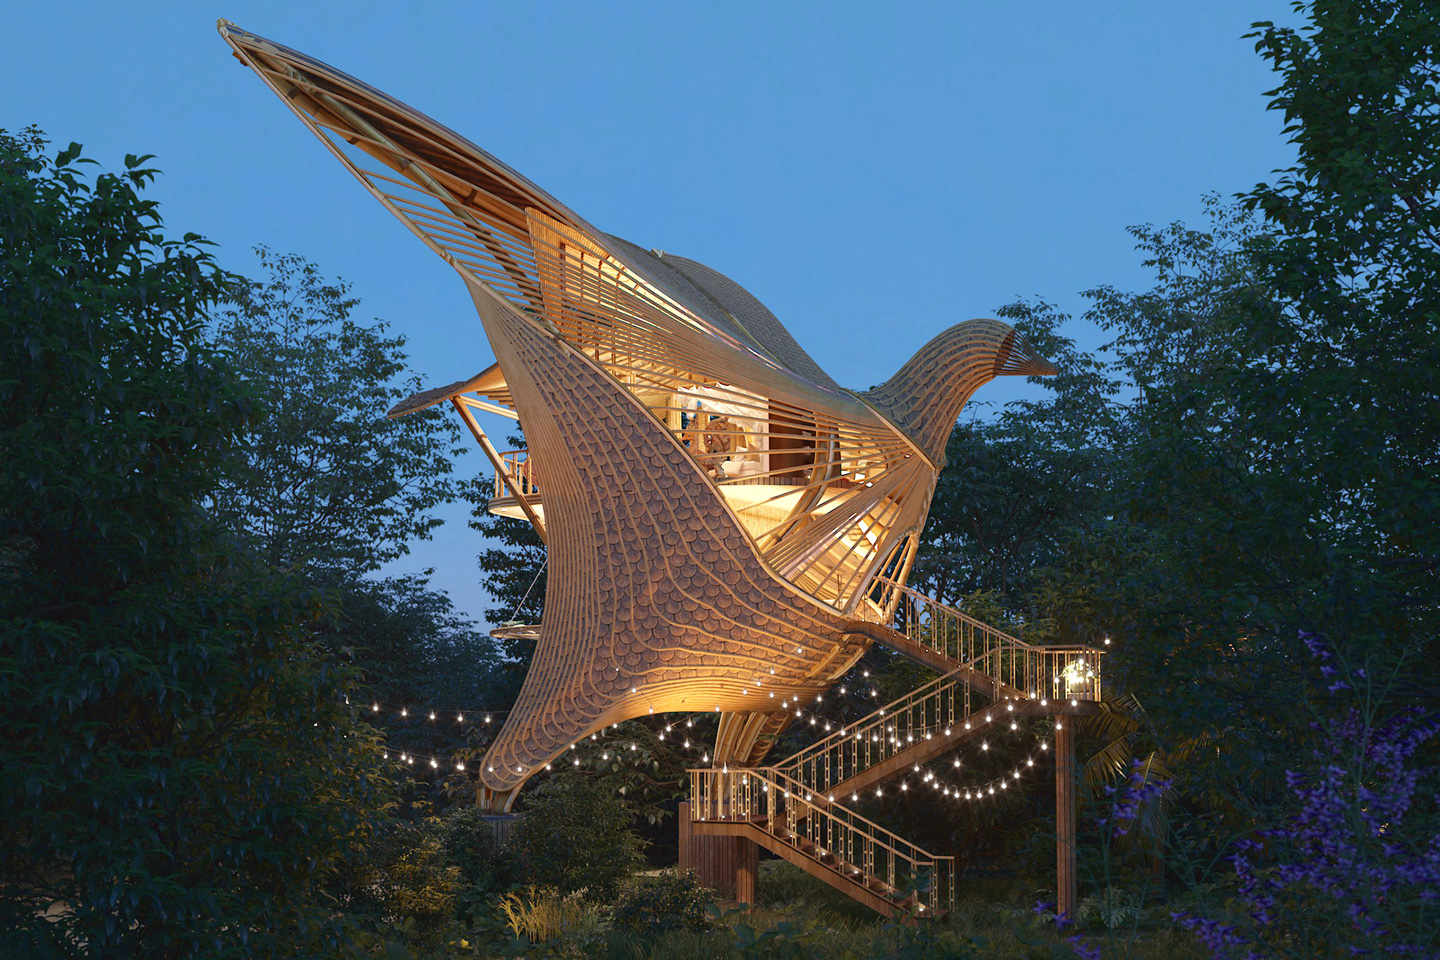 Picturesque bamboo glamping villa looks like a large graceful bird in flight